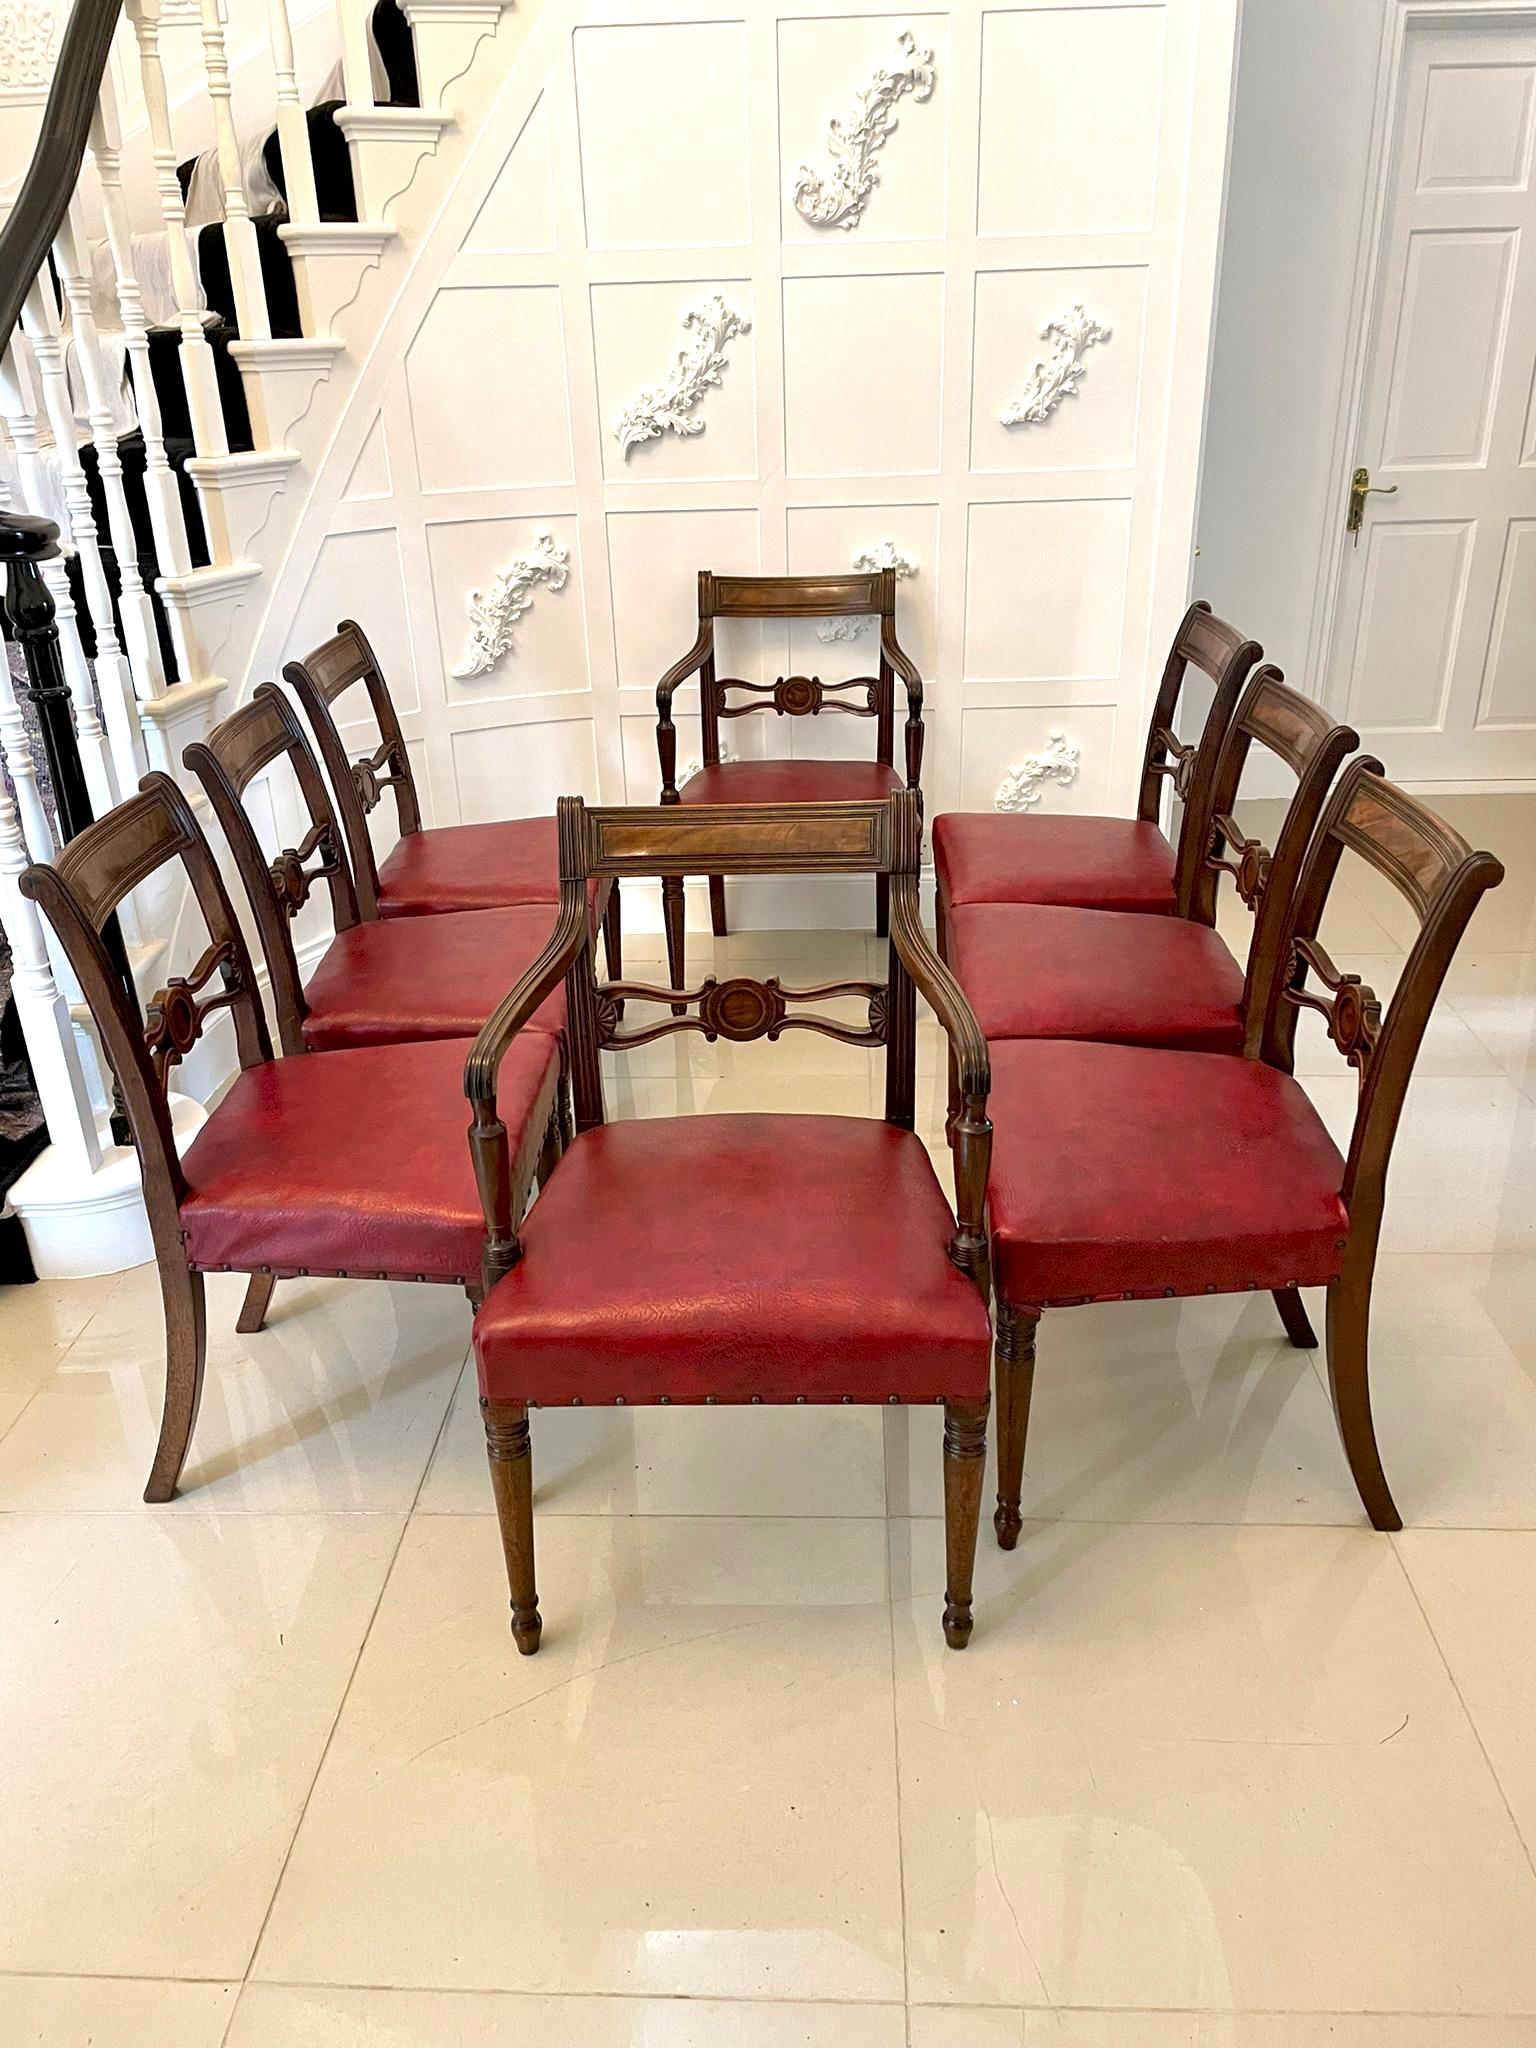 Fine set of eight antique George IIIl quality mahogany dining chairs consisting of two carver chairs and six single chairs in original condition having a quality reeded top rail and carved shaped mahogany splat to the centre. The pair of carver